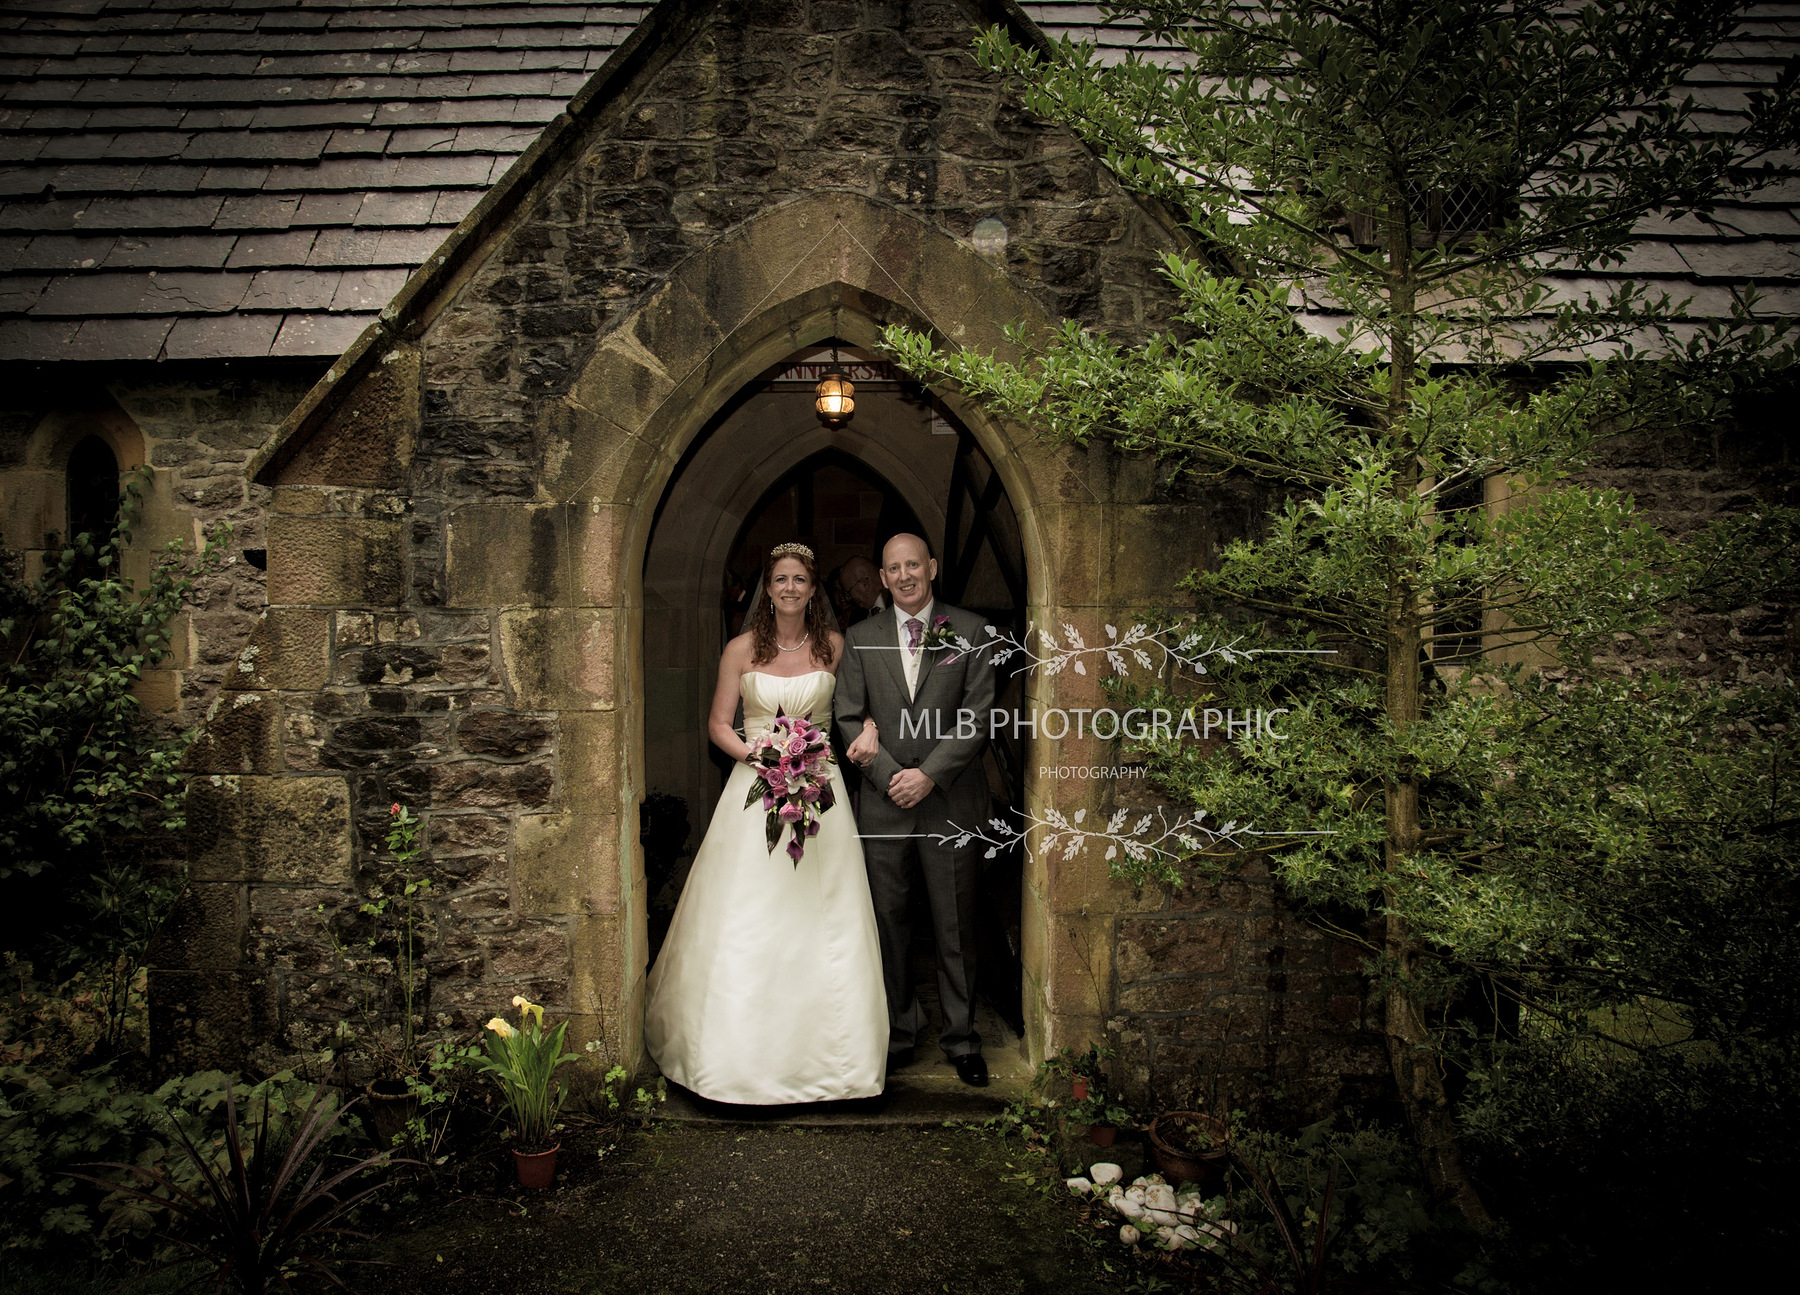 MLB photographic - Wedding, Maternity, Newborn, Family & Pet Photography in  Chapel-en-le-Frith